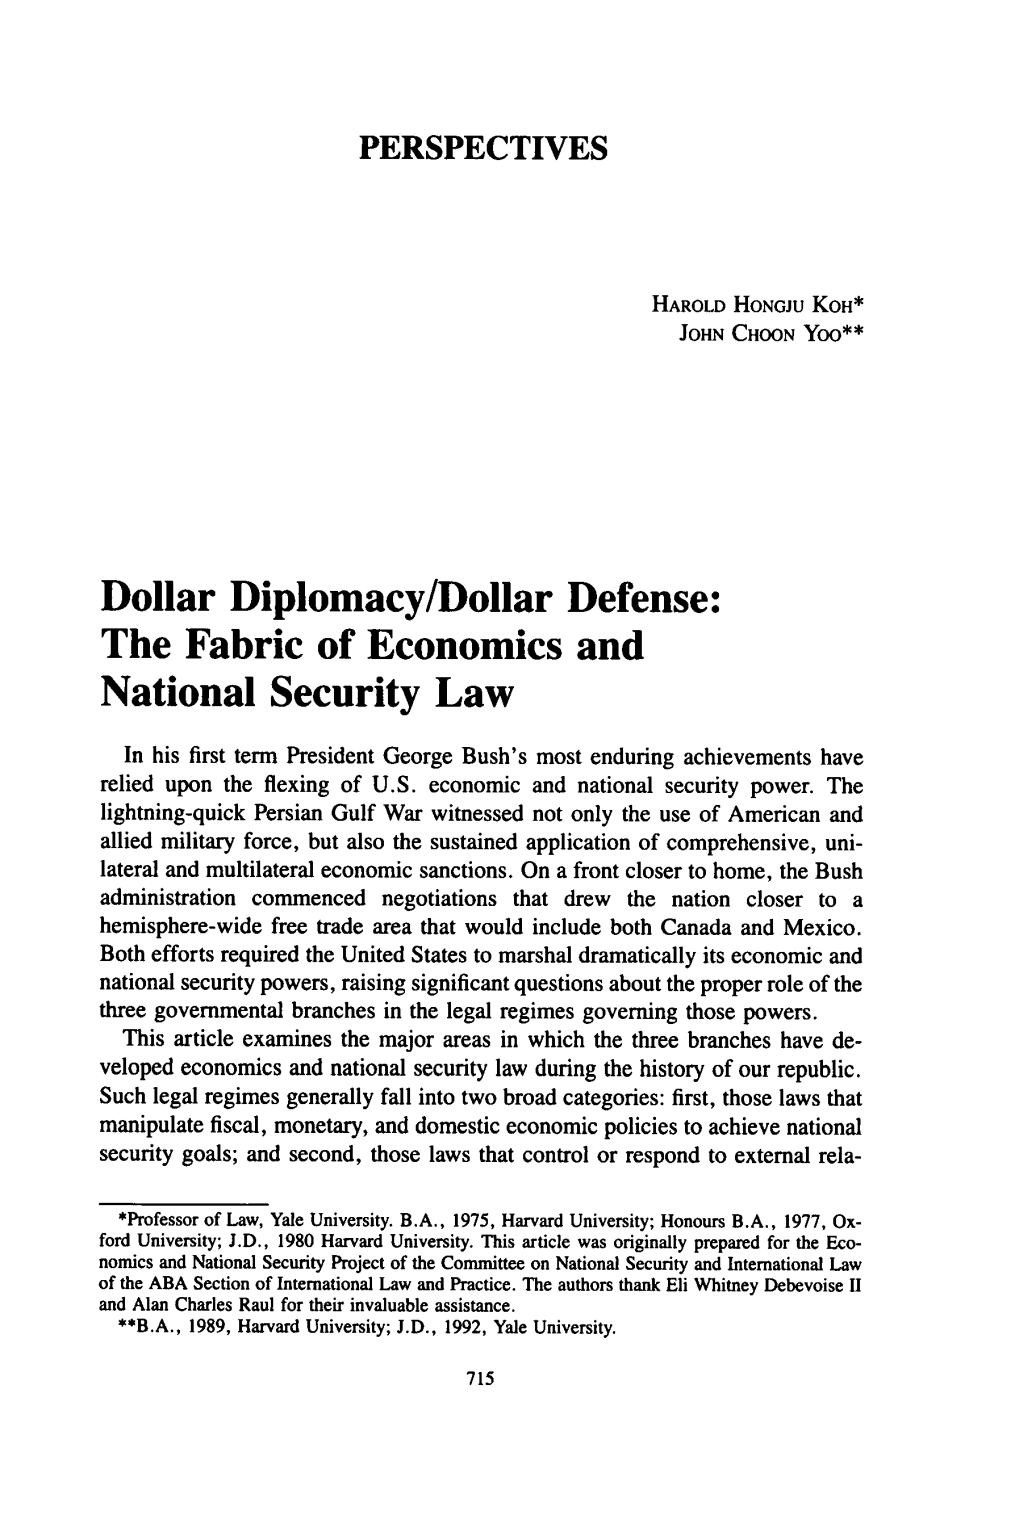 Dollar Diplomacy/Dollar Defense: the Fabric of Economics and National Security Law